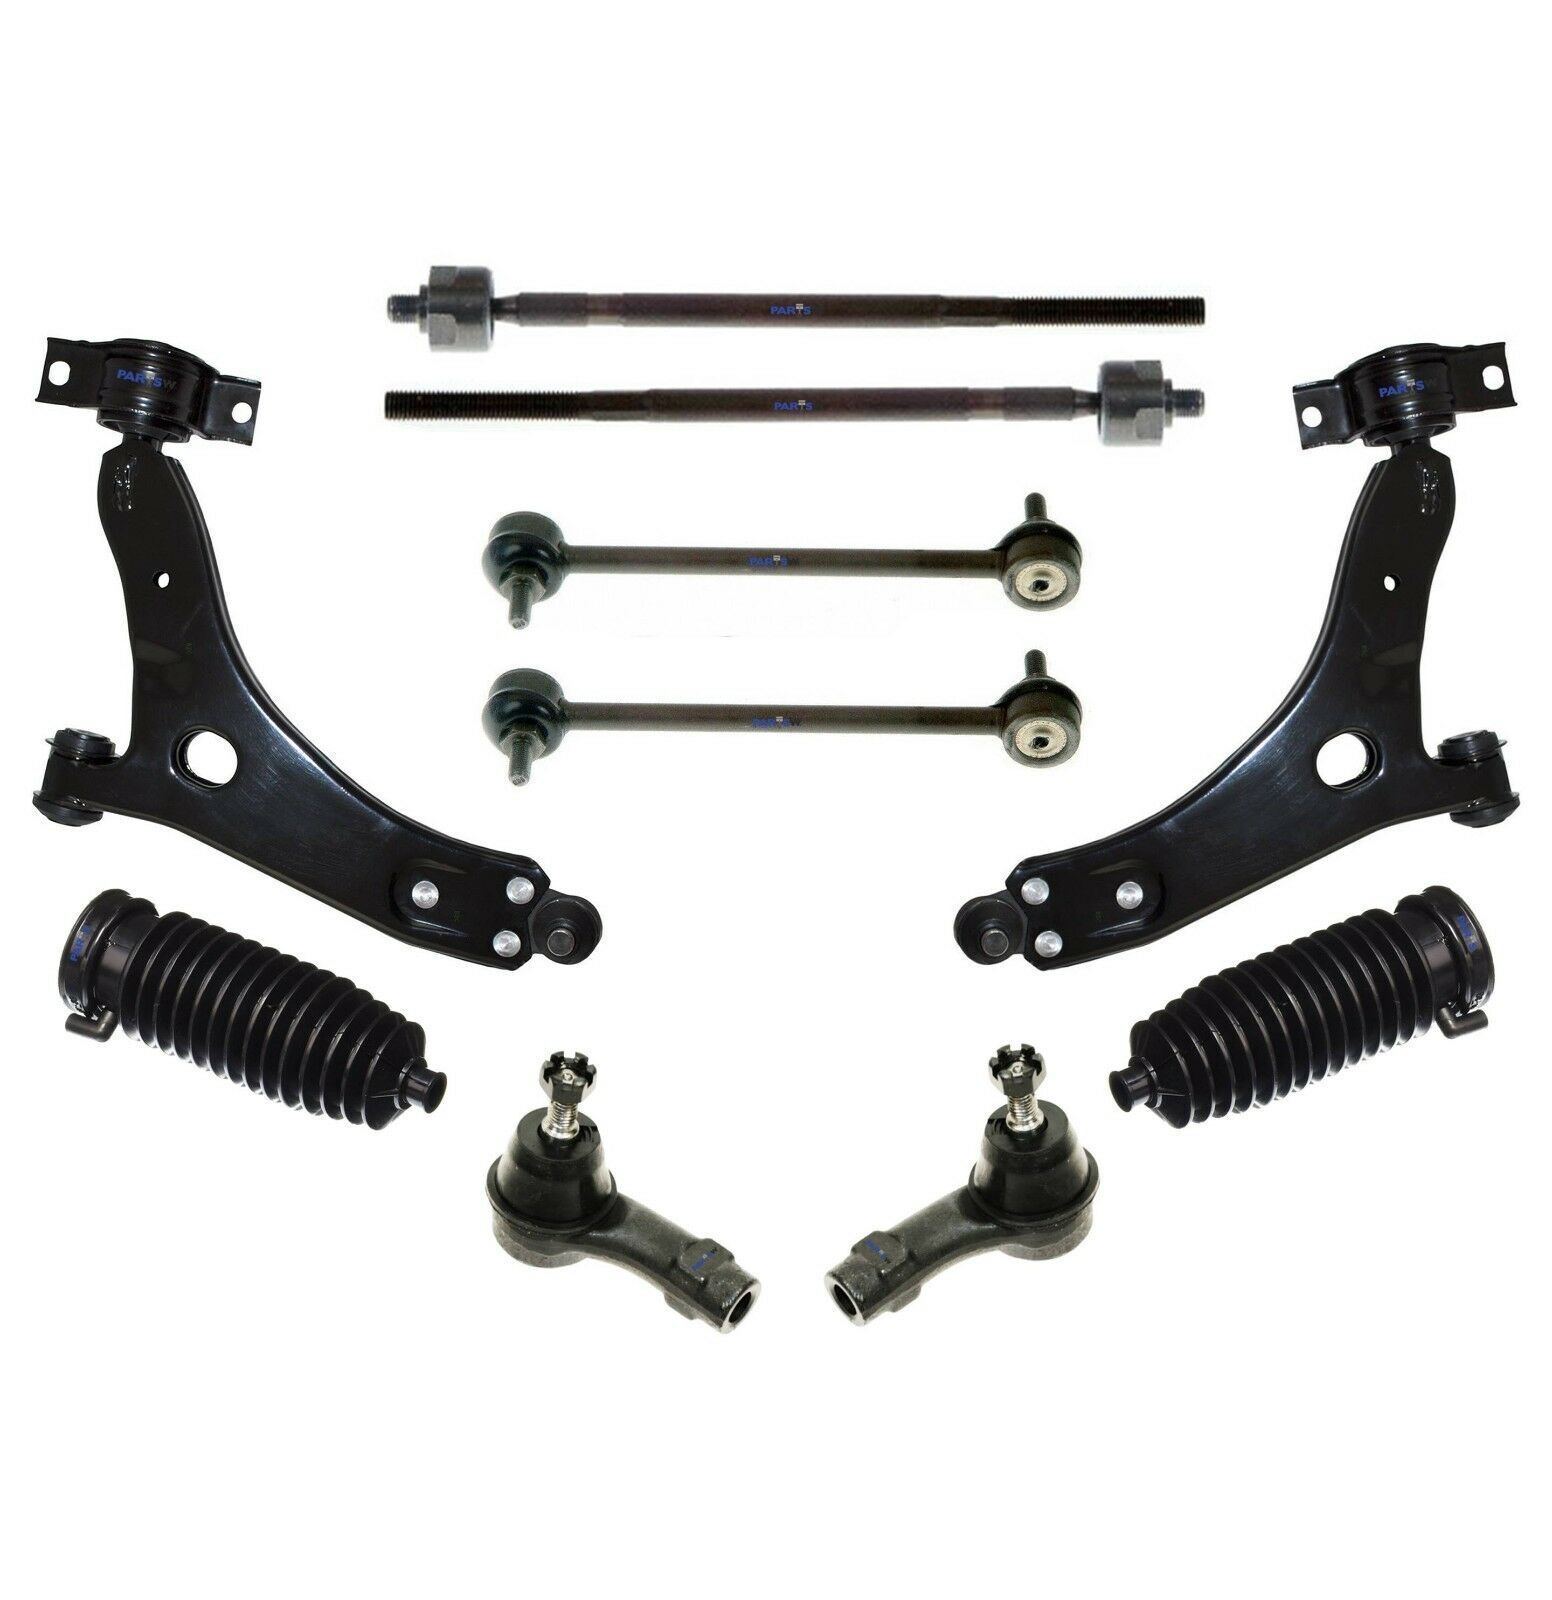 10 Pc Suspension Kit for Ford Focus All Models, Lower Control Arms & Ball Joints